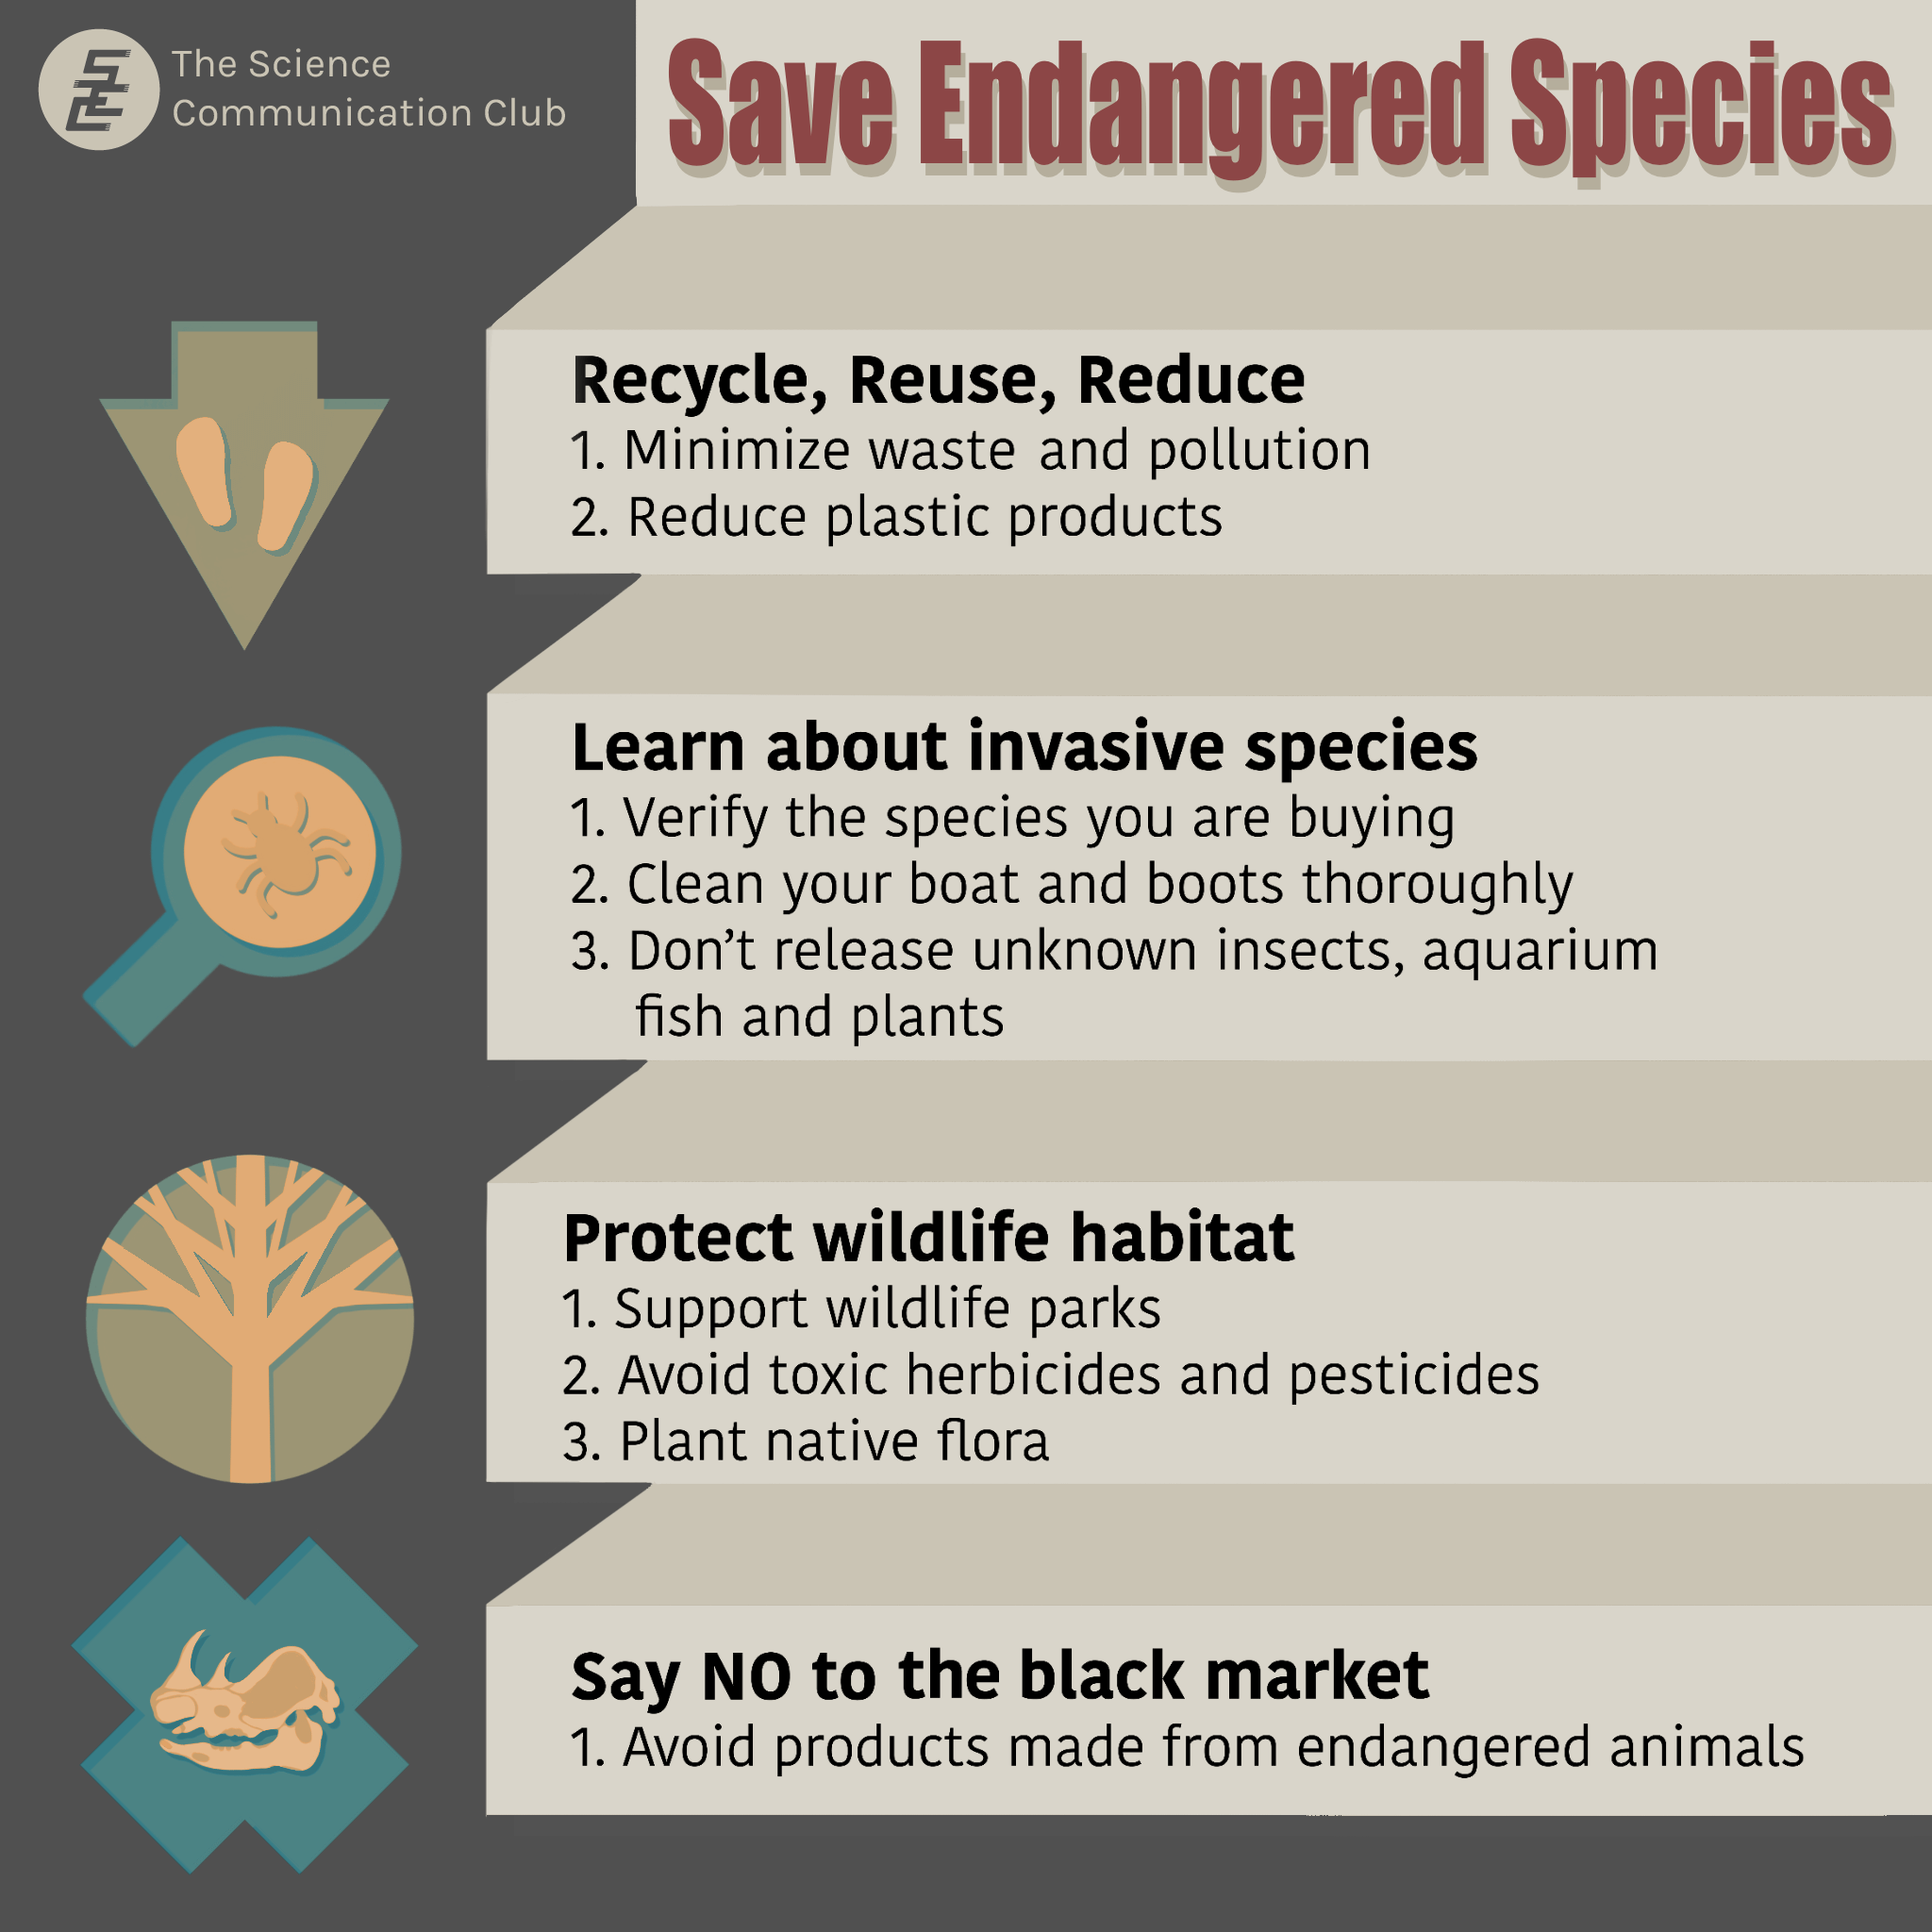 An image listing the ways you can help save endangered species. First, recycle, reduce, and reuse to minimize waste and pollution and reduce plastic products. Second, learn about invasive species by verifying the species you are buying, cleaning your boat and boots thoroughly, and not releasing unknown insects, aquarium fish, and plants. Third, protect wildlife habitats by supporting wildlife parks, avoiding toxic herbicides and pesticides, and planting native flora. Fourth, say no to the black market by avoiding products made from endangered animals.